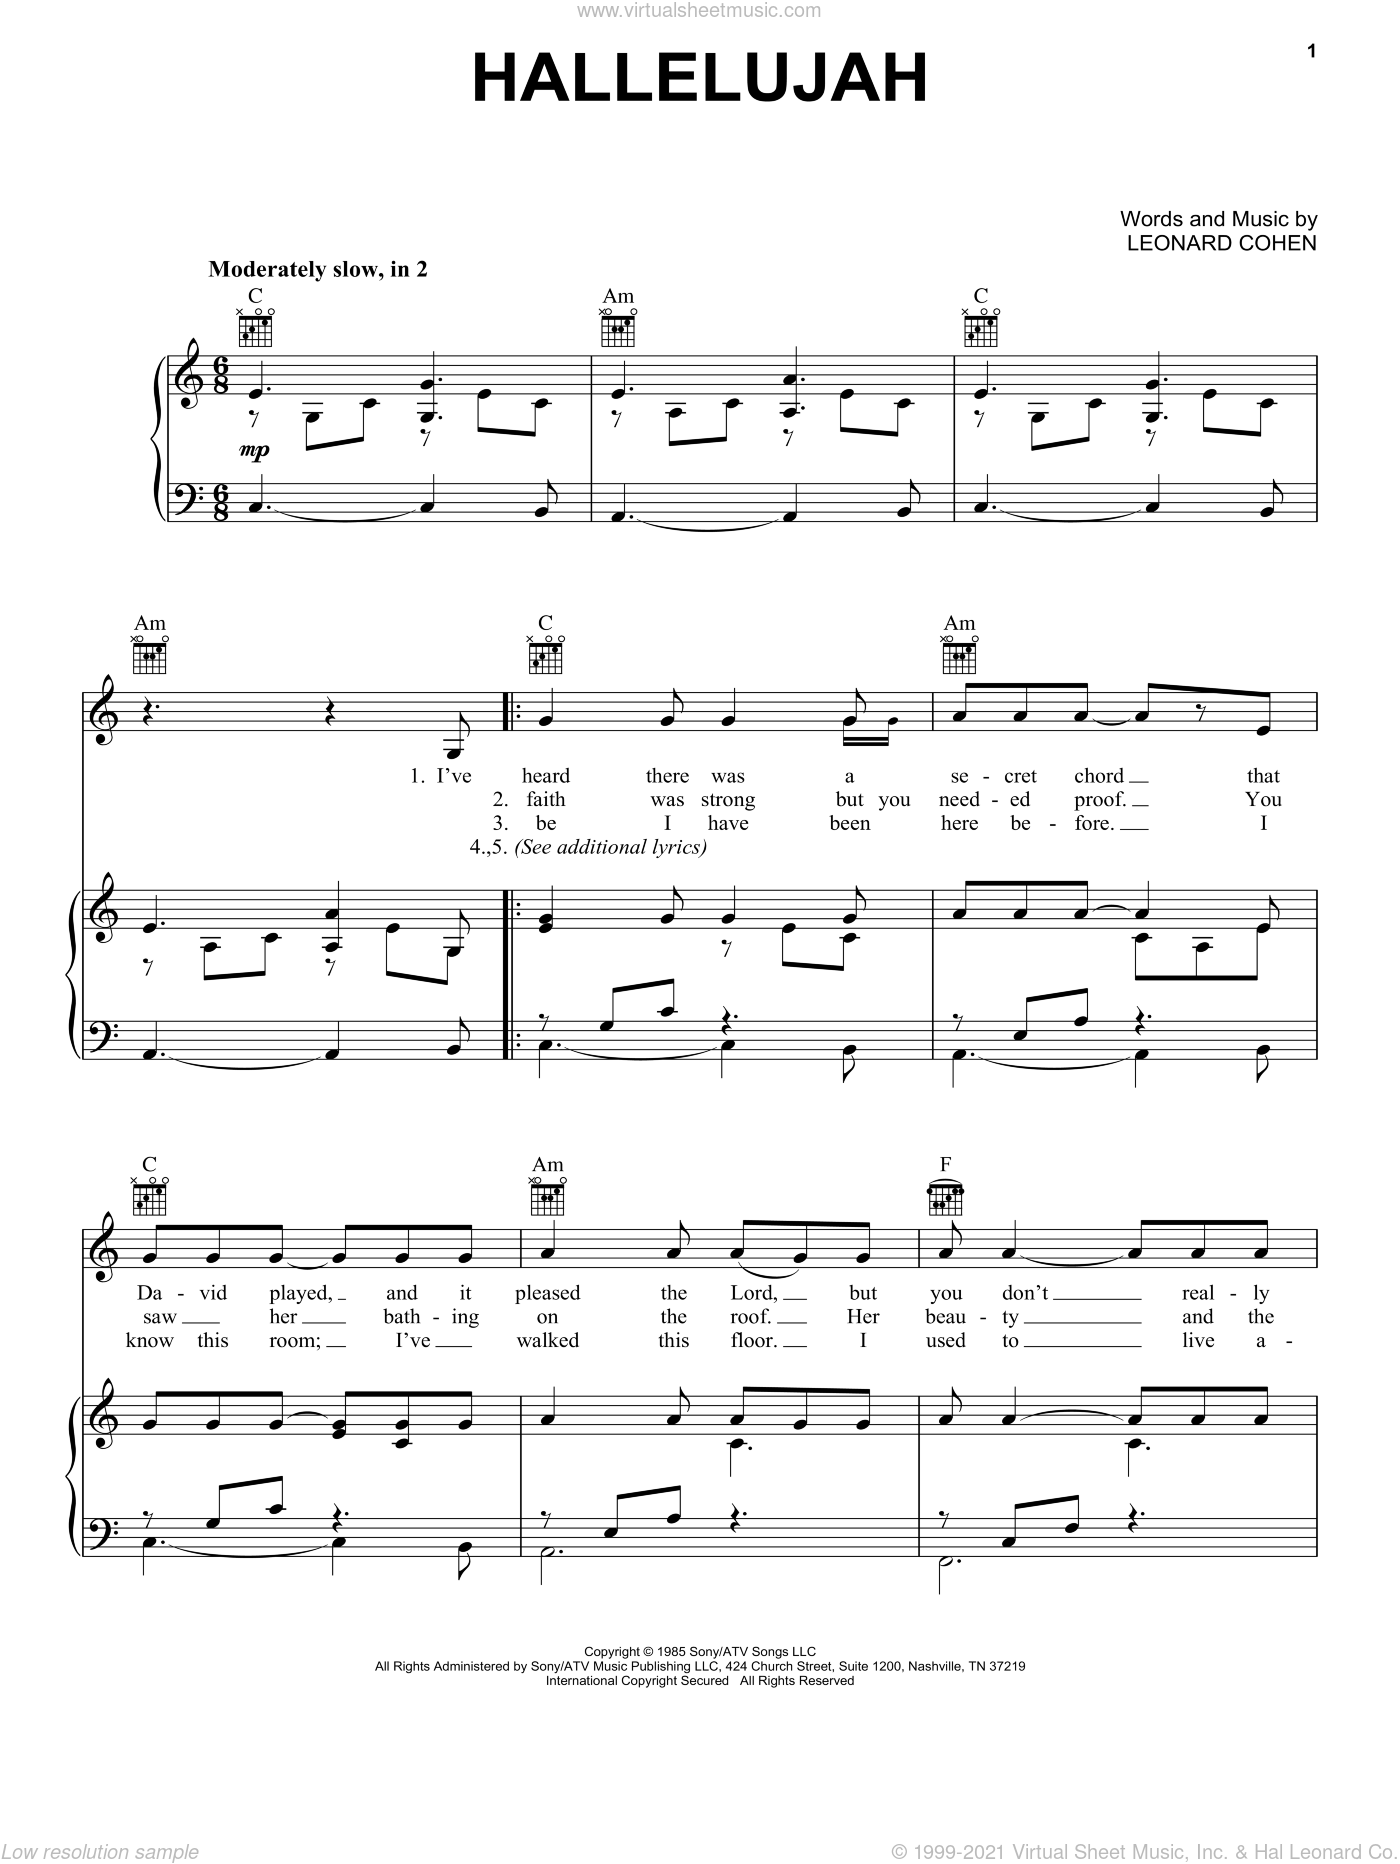 Voegele - Hallelujah sheet music for voice, piano or ...